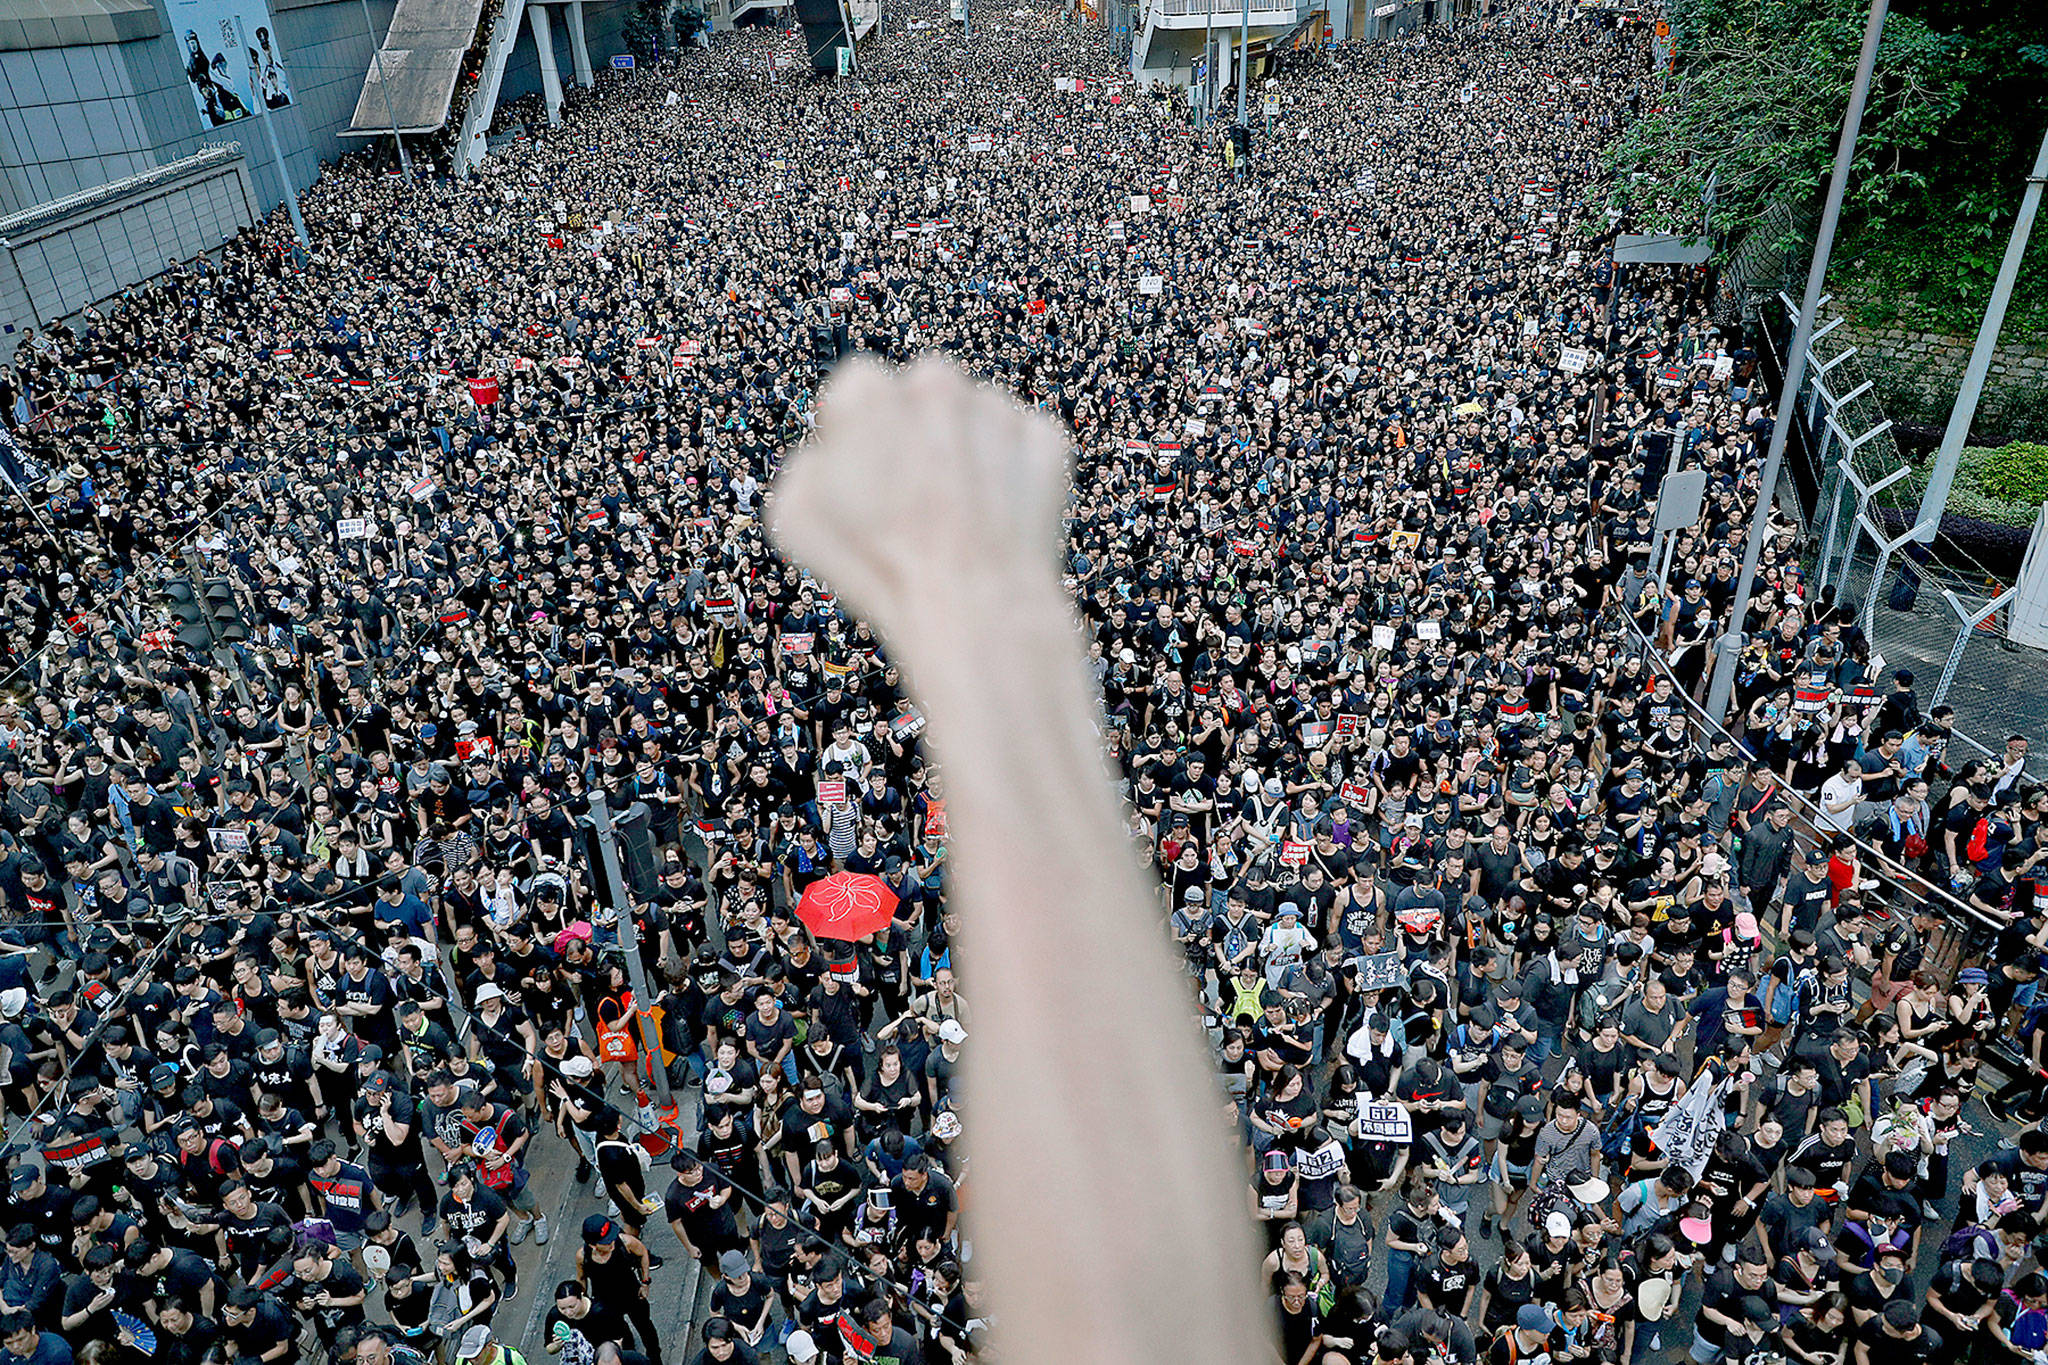 A protester clenches his fist as tens of thousands march in the streets of Hong Kong on Sunday. (AP Photo/Vincent Yu)